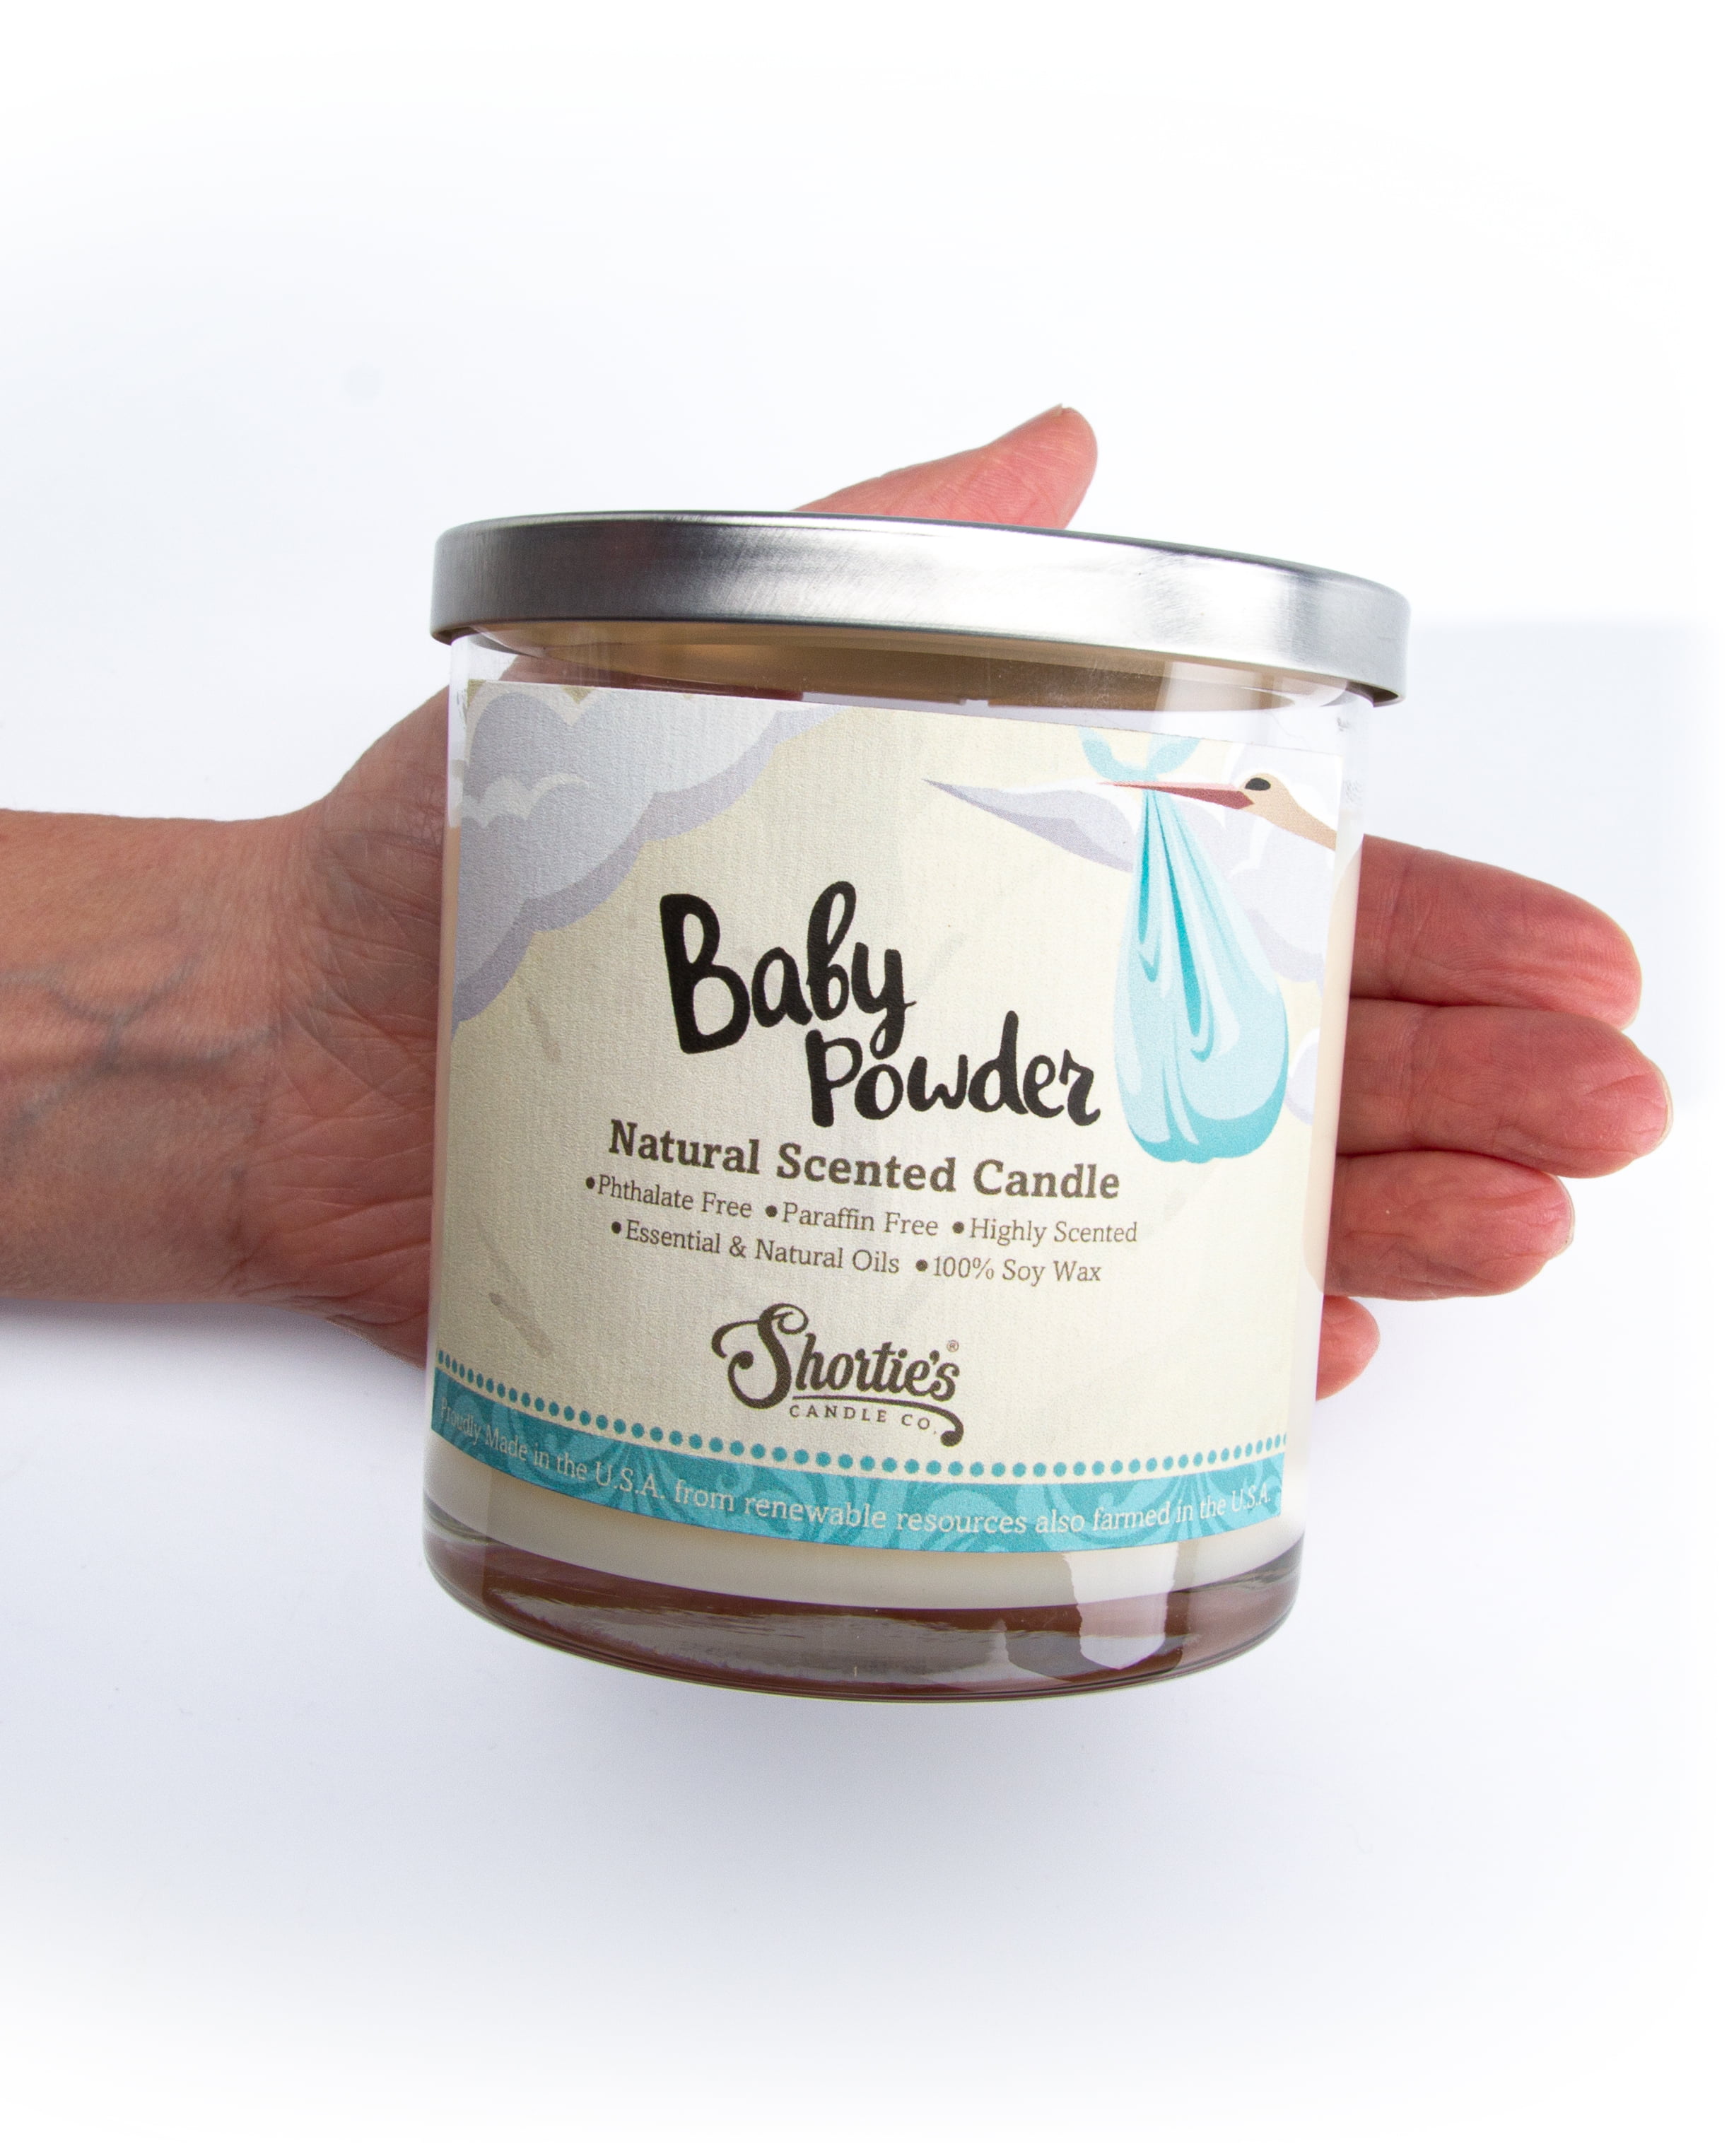 Baby Powder Soy Wax Candle 4 oz.– Southern Candle Studio